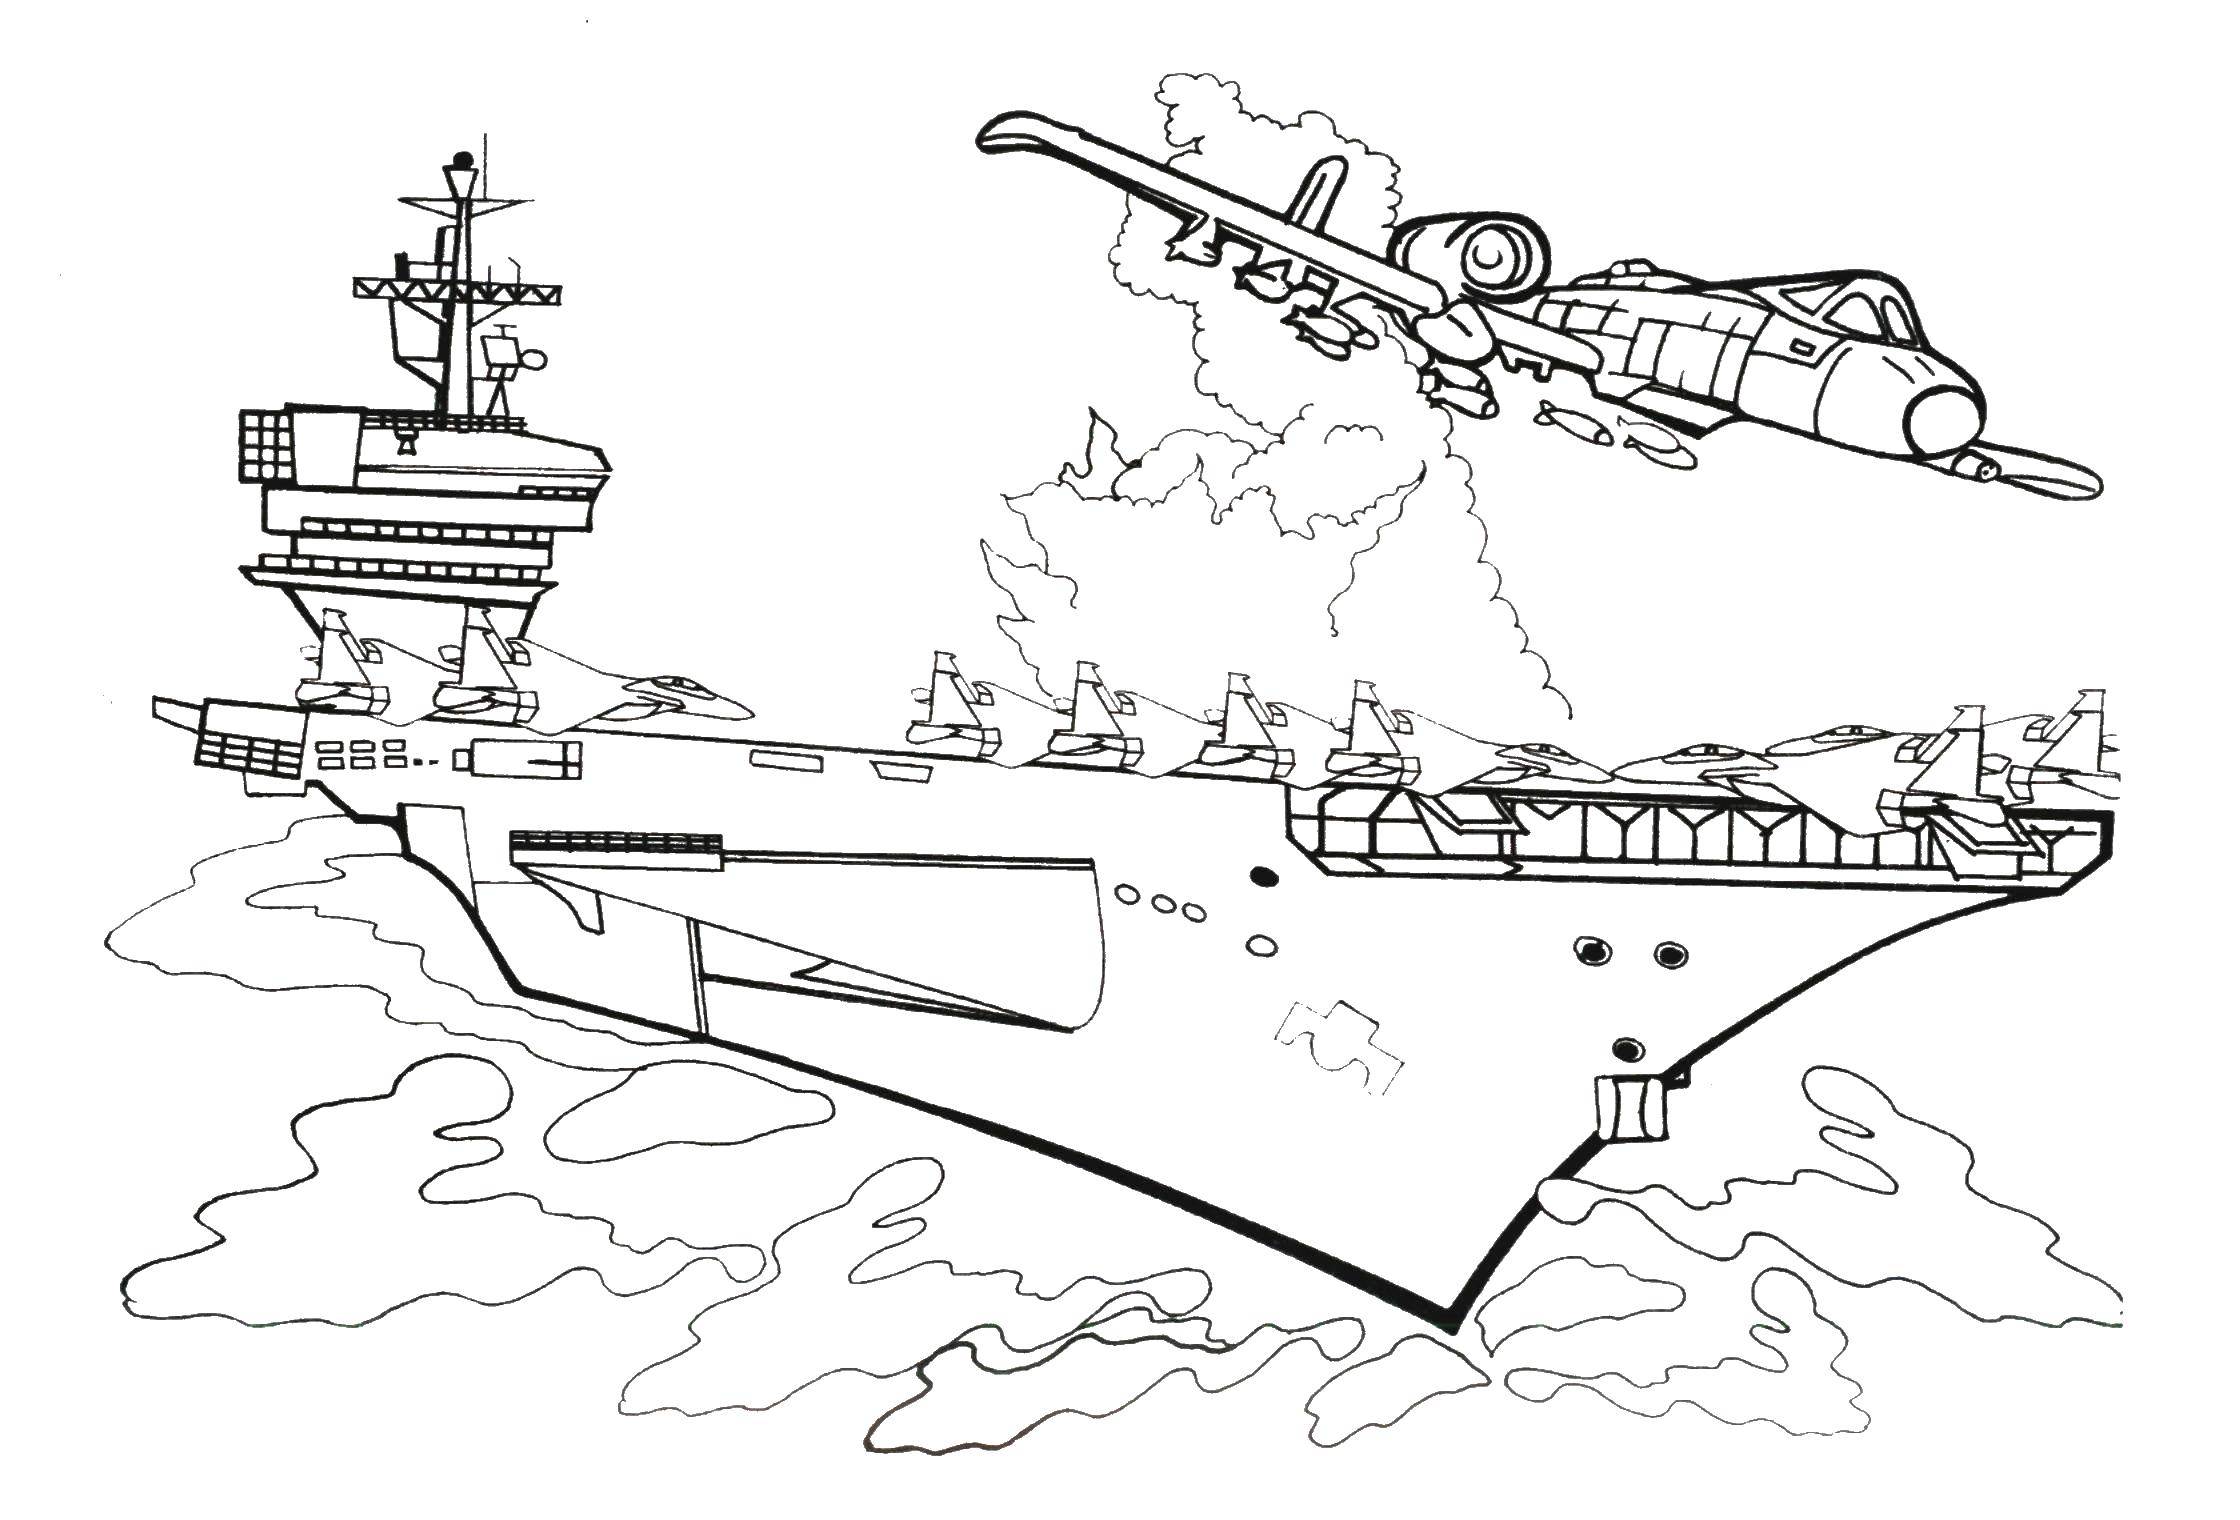 Coloring Military ship and the plane. Category military. Tags:  war, airplane, ship.